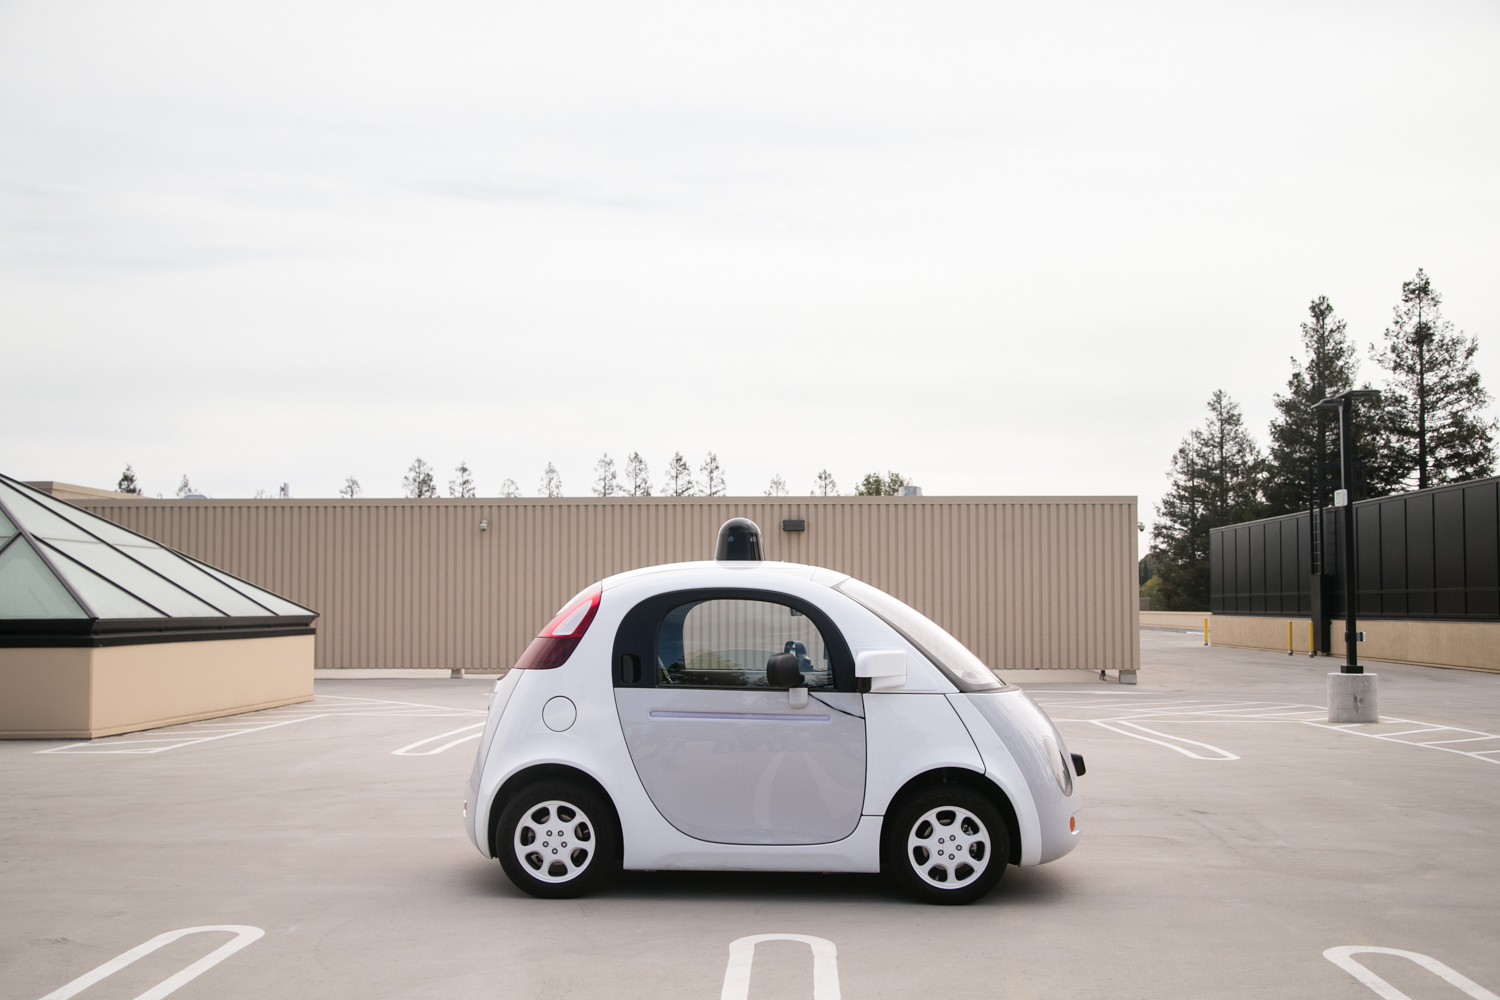  A prototype self-driving car is seen on the roof of a Google campus building in Mountain View, California 